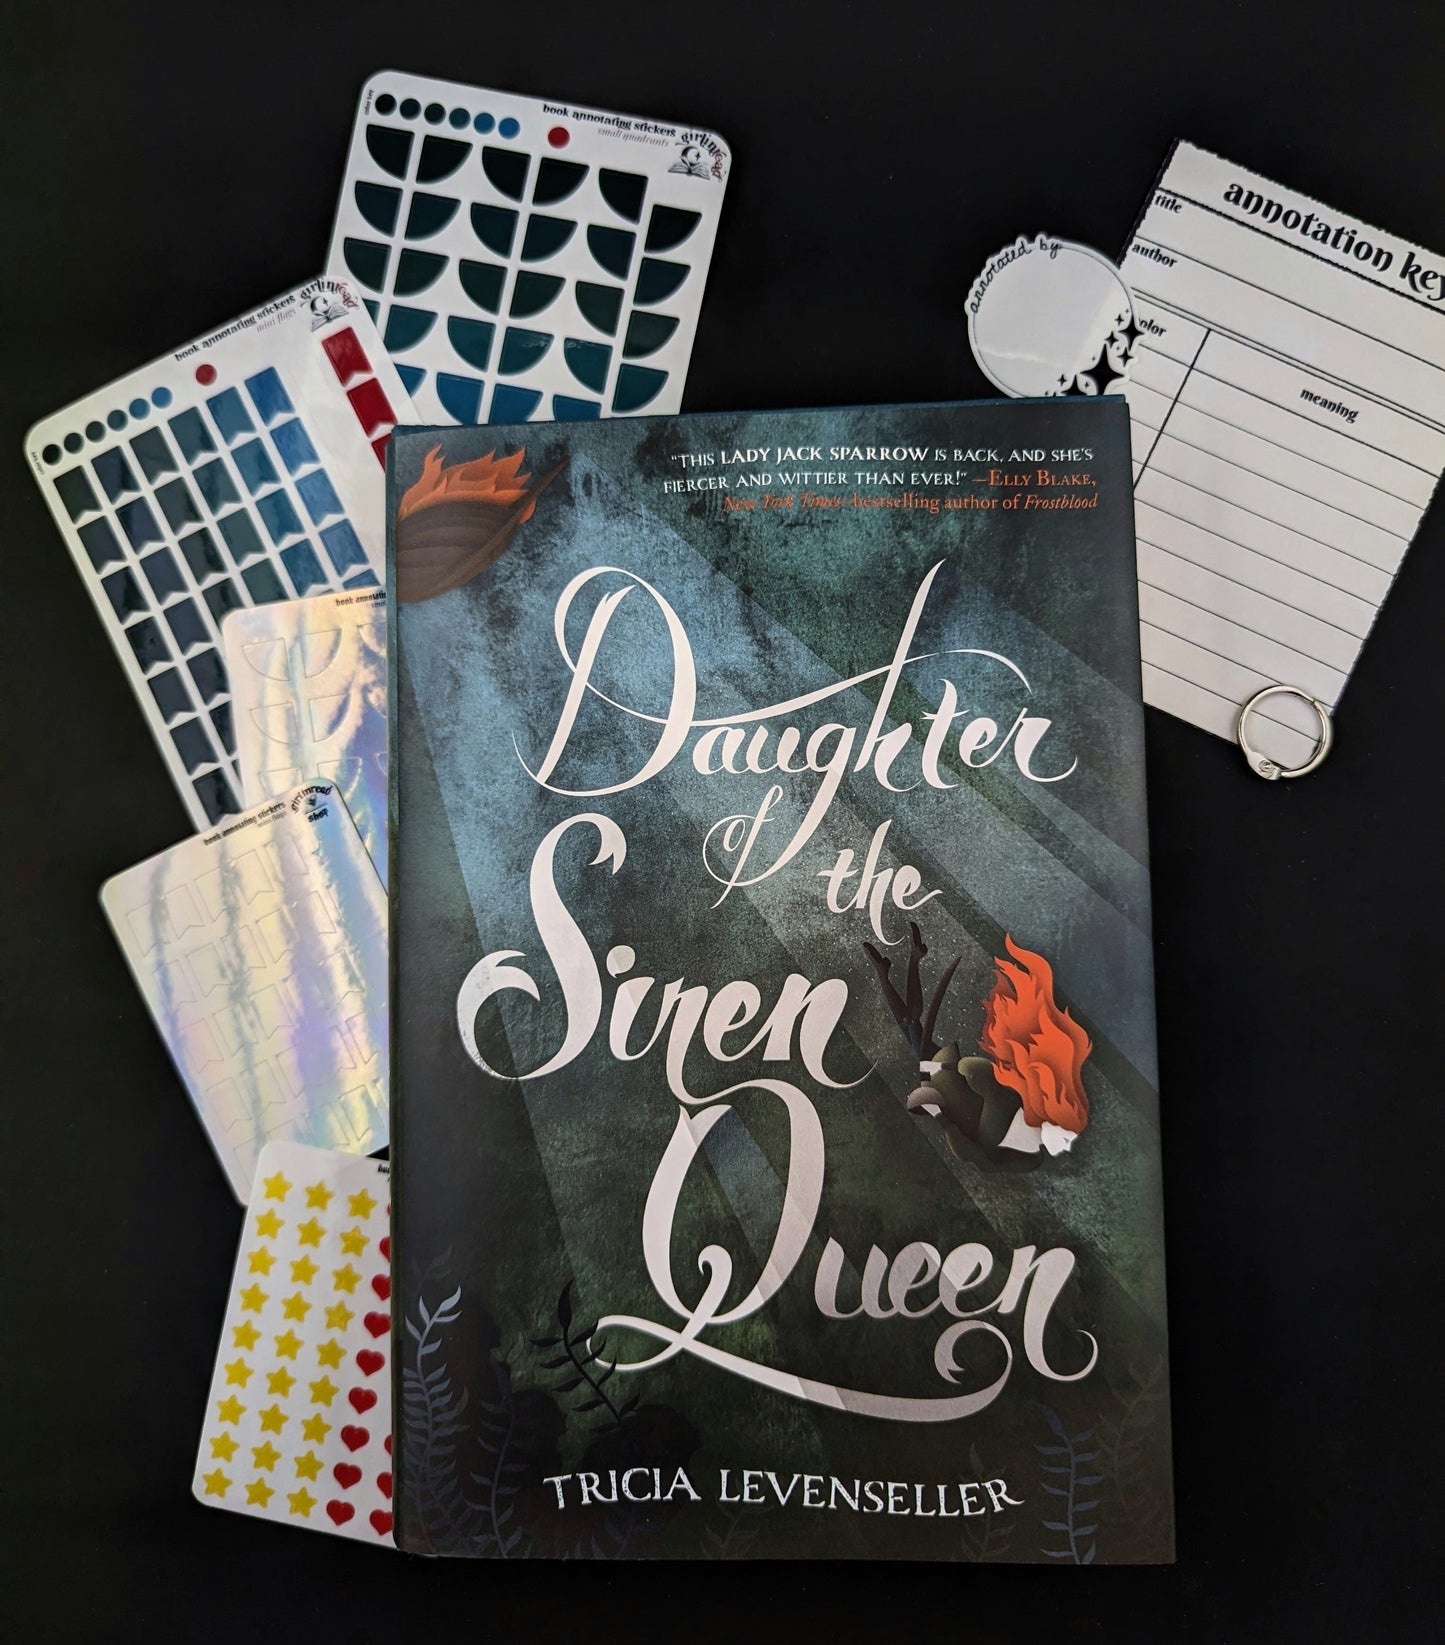 daughter of the pirate king & daughter of the siren queen book annotating giftset (books included)